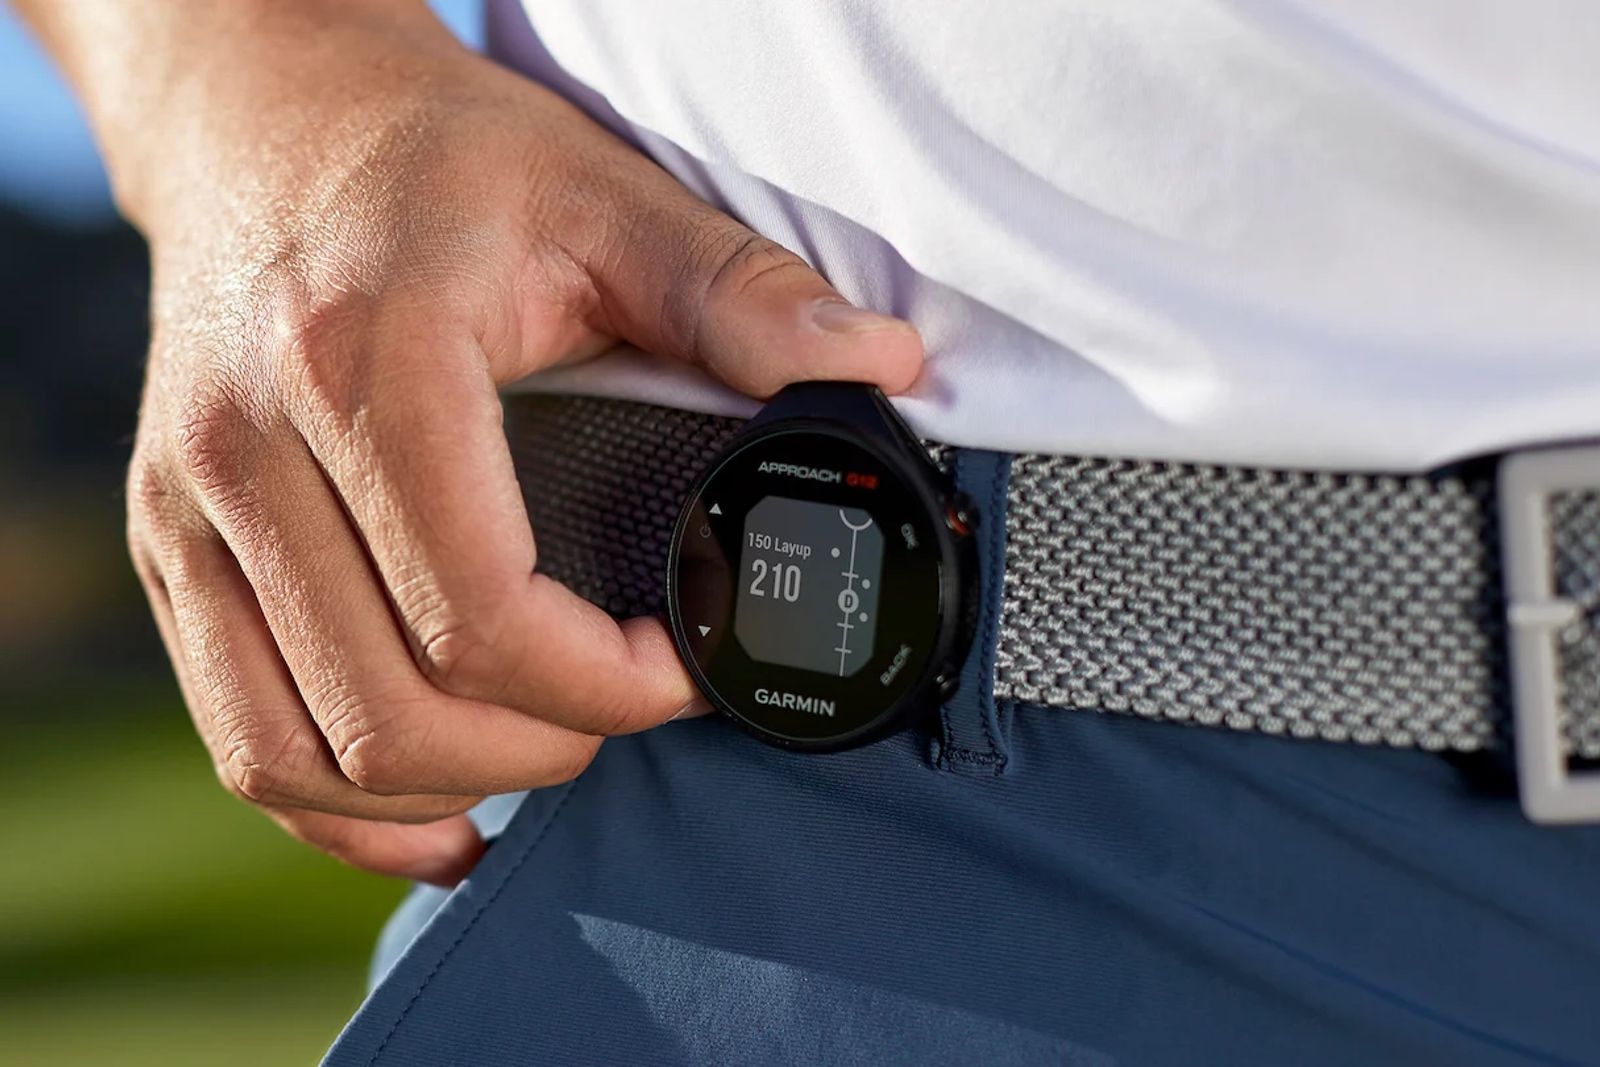 Garmin updates its golf wearables for 2021 - Approach S42, S12 and G12 all announced photo 4